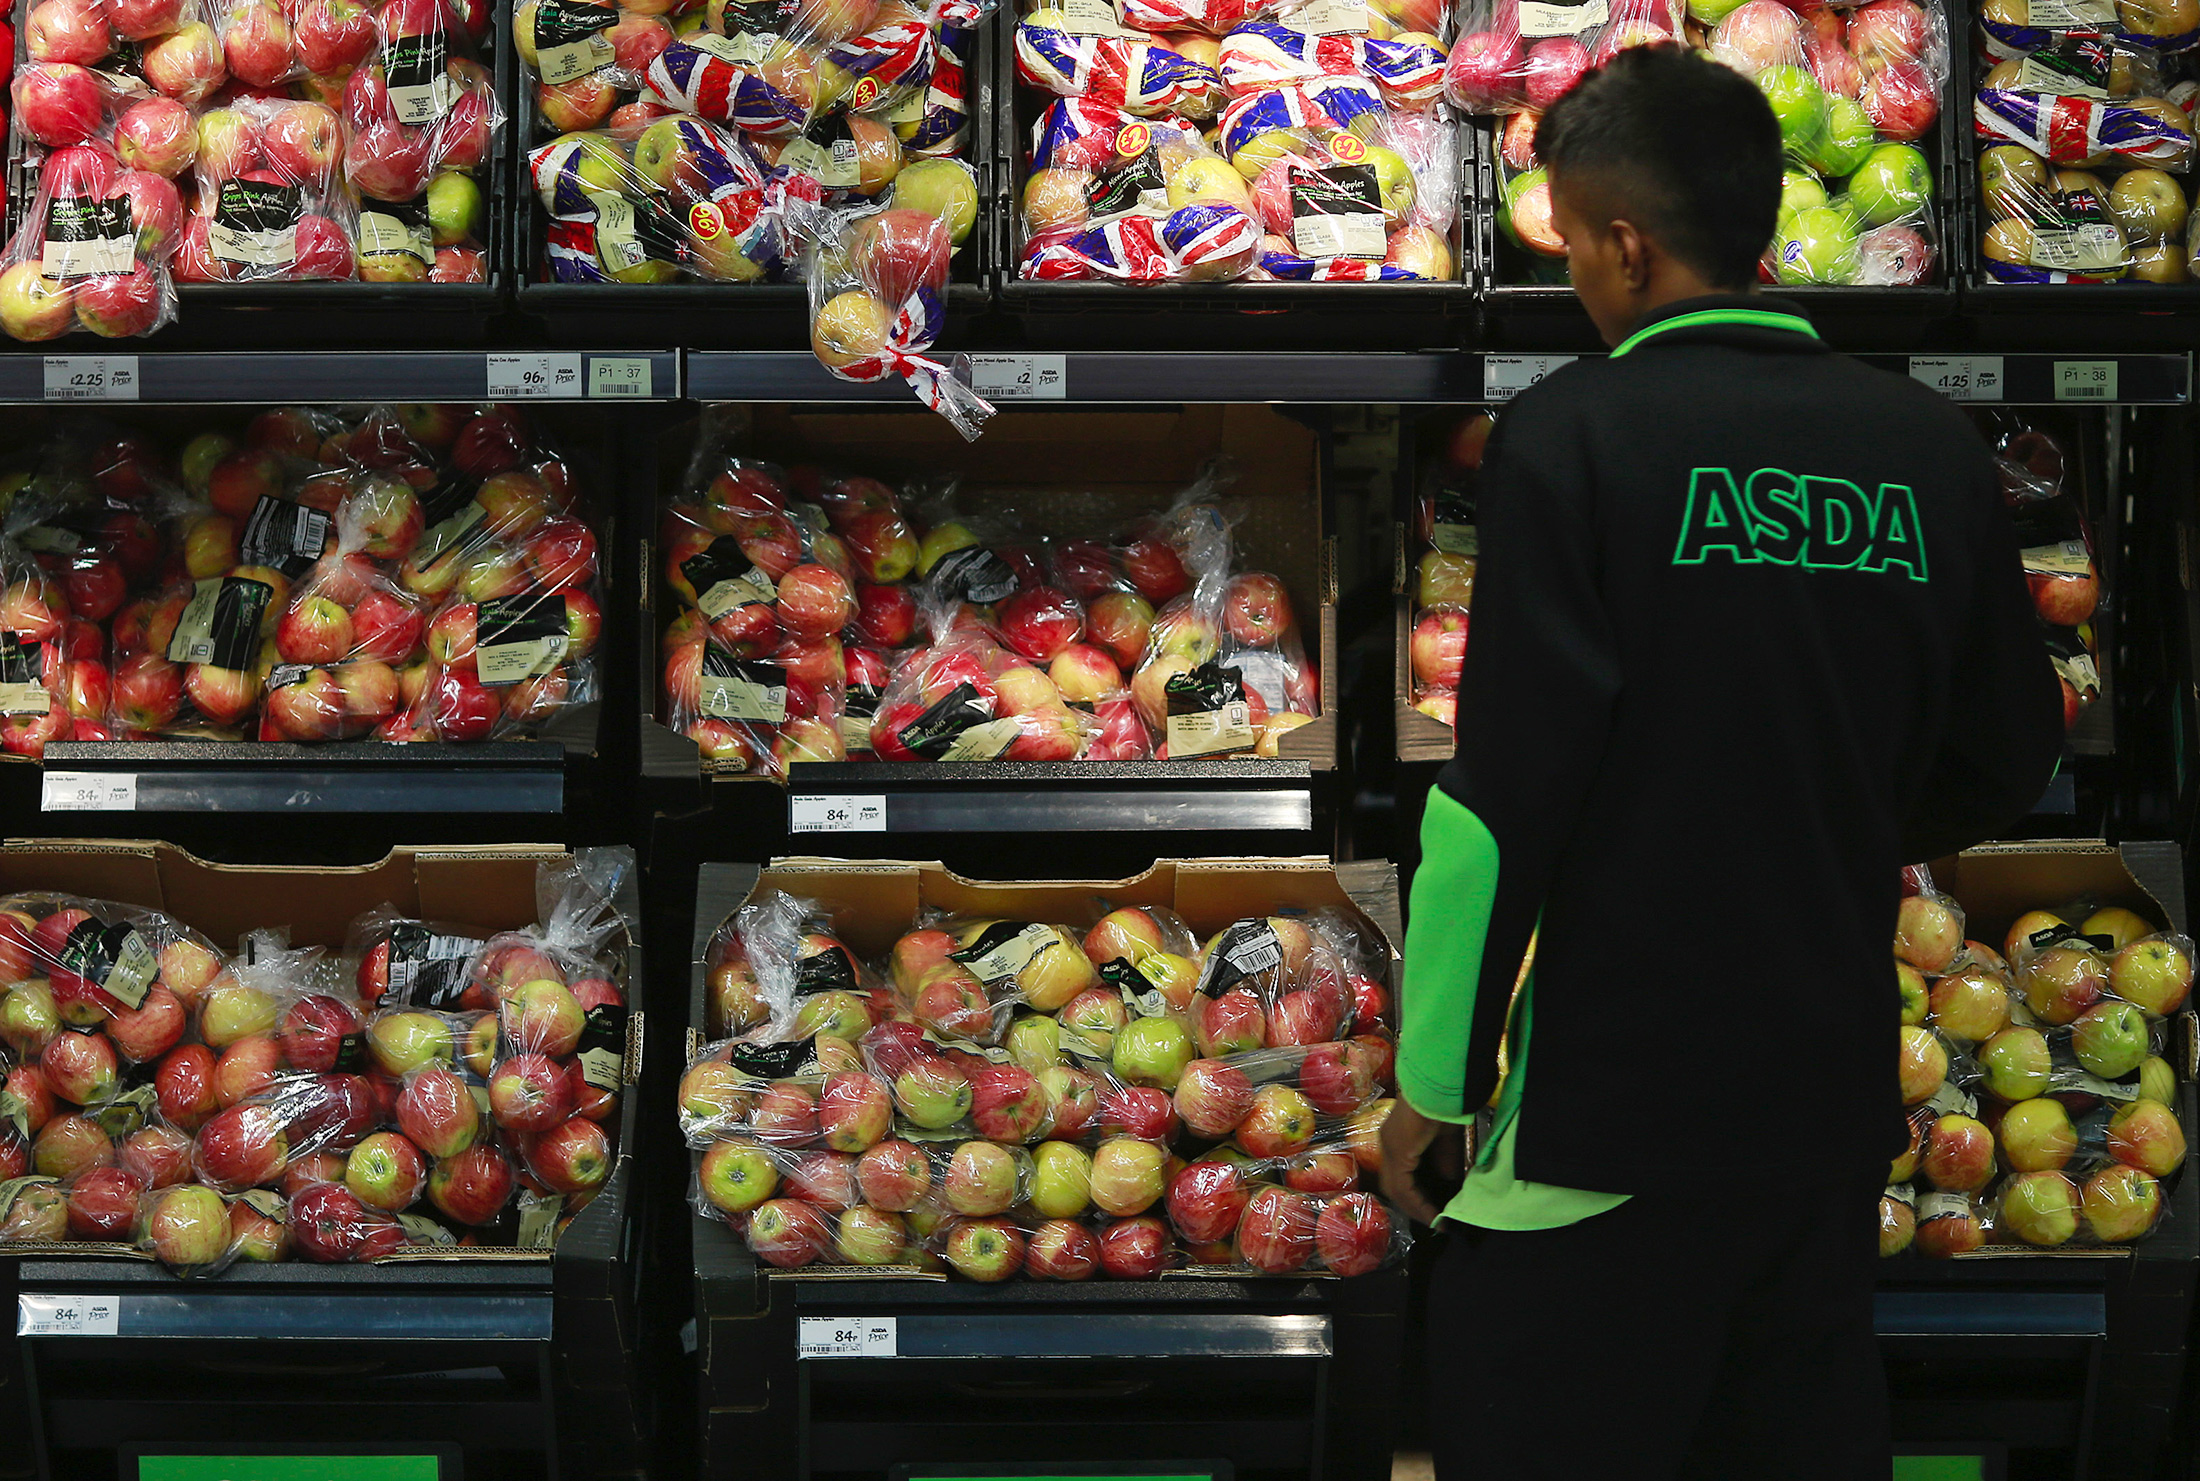 An employee checks the stock levels of an apple display in the fruit and vegetable section of an Asda supermarket in London.